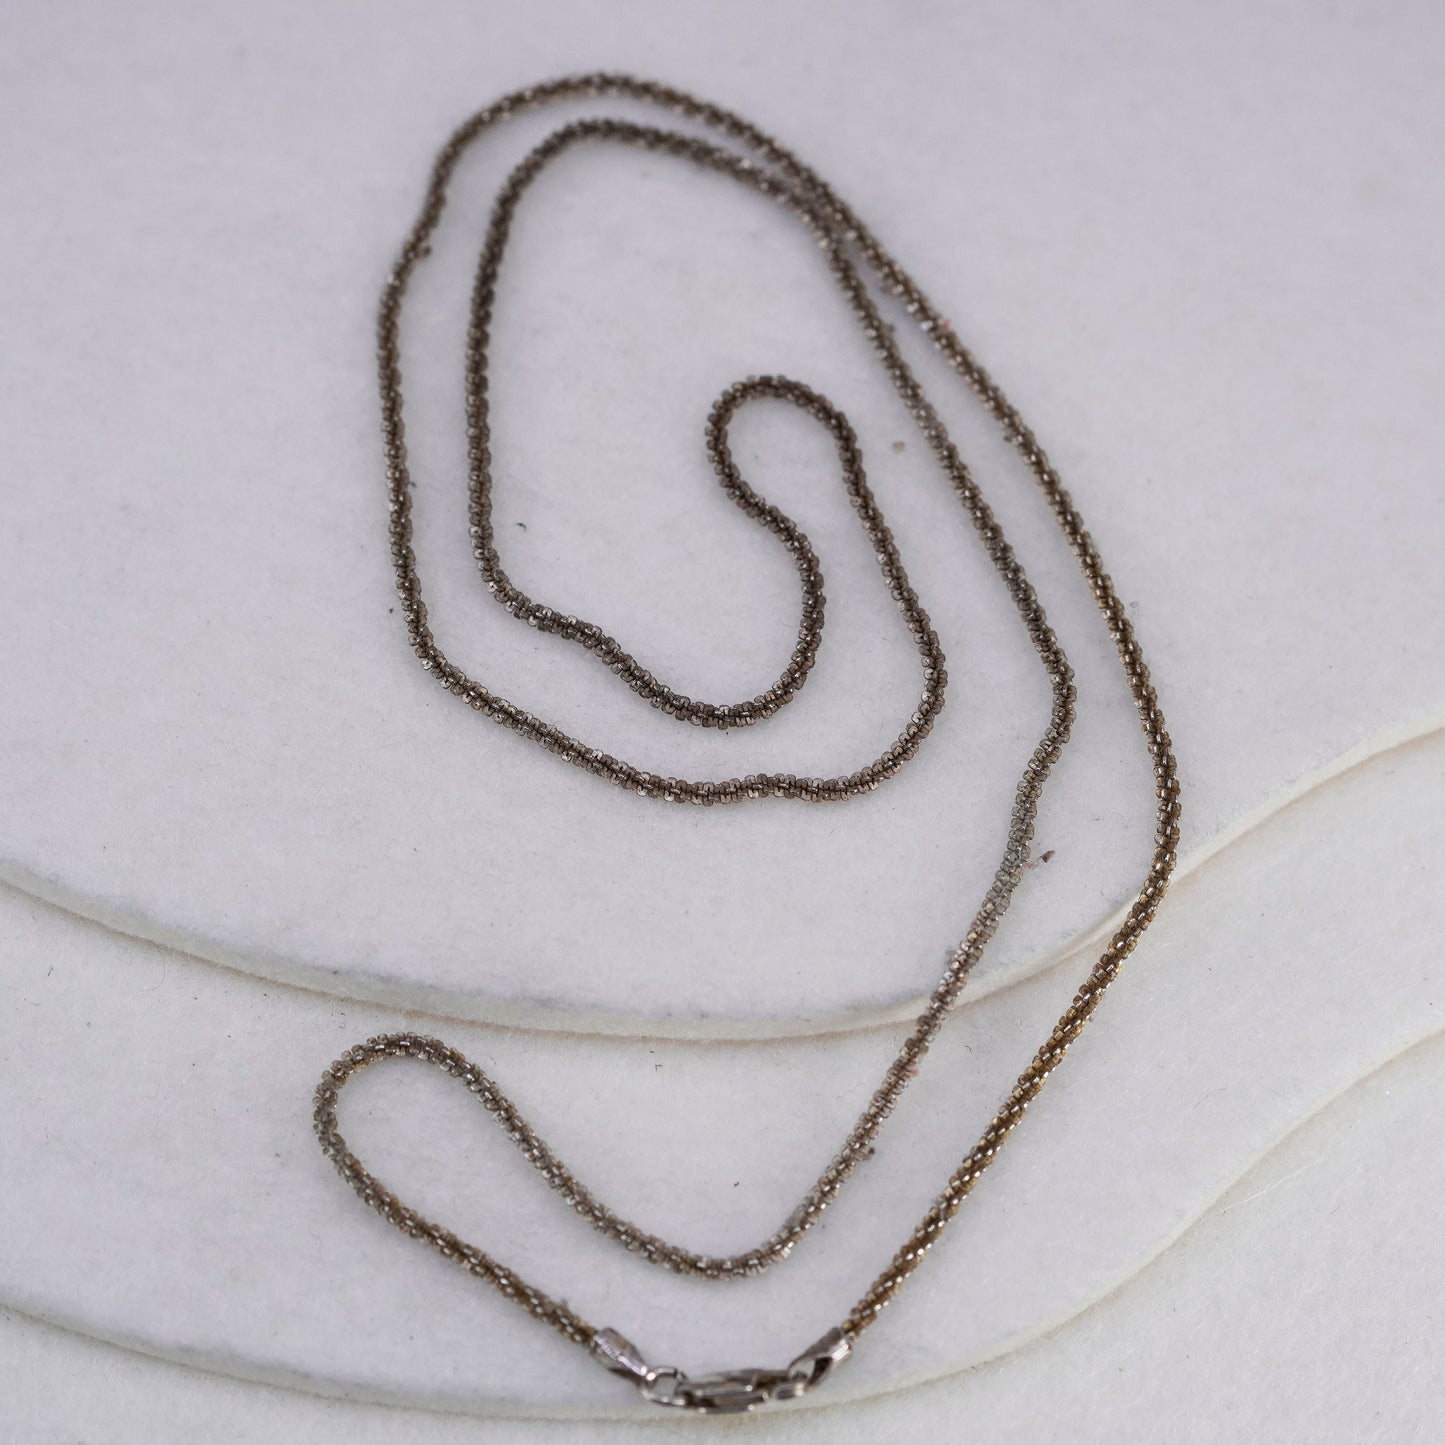 24” 2mm, vintage Italy Sterling 925 silver twisted chain necklace